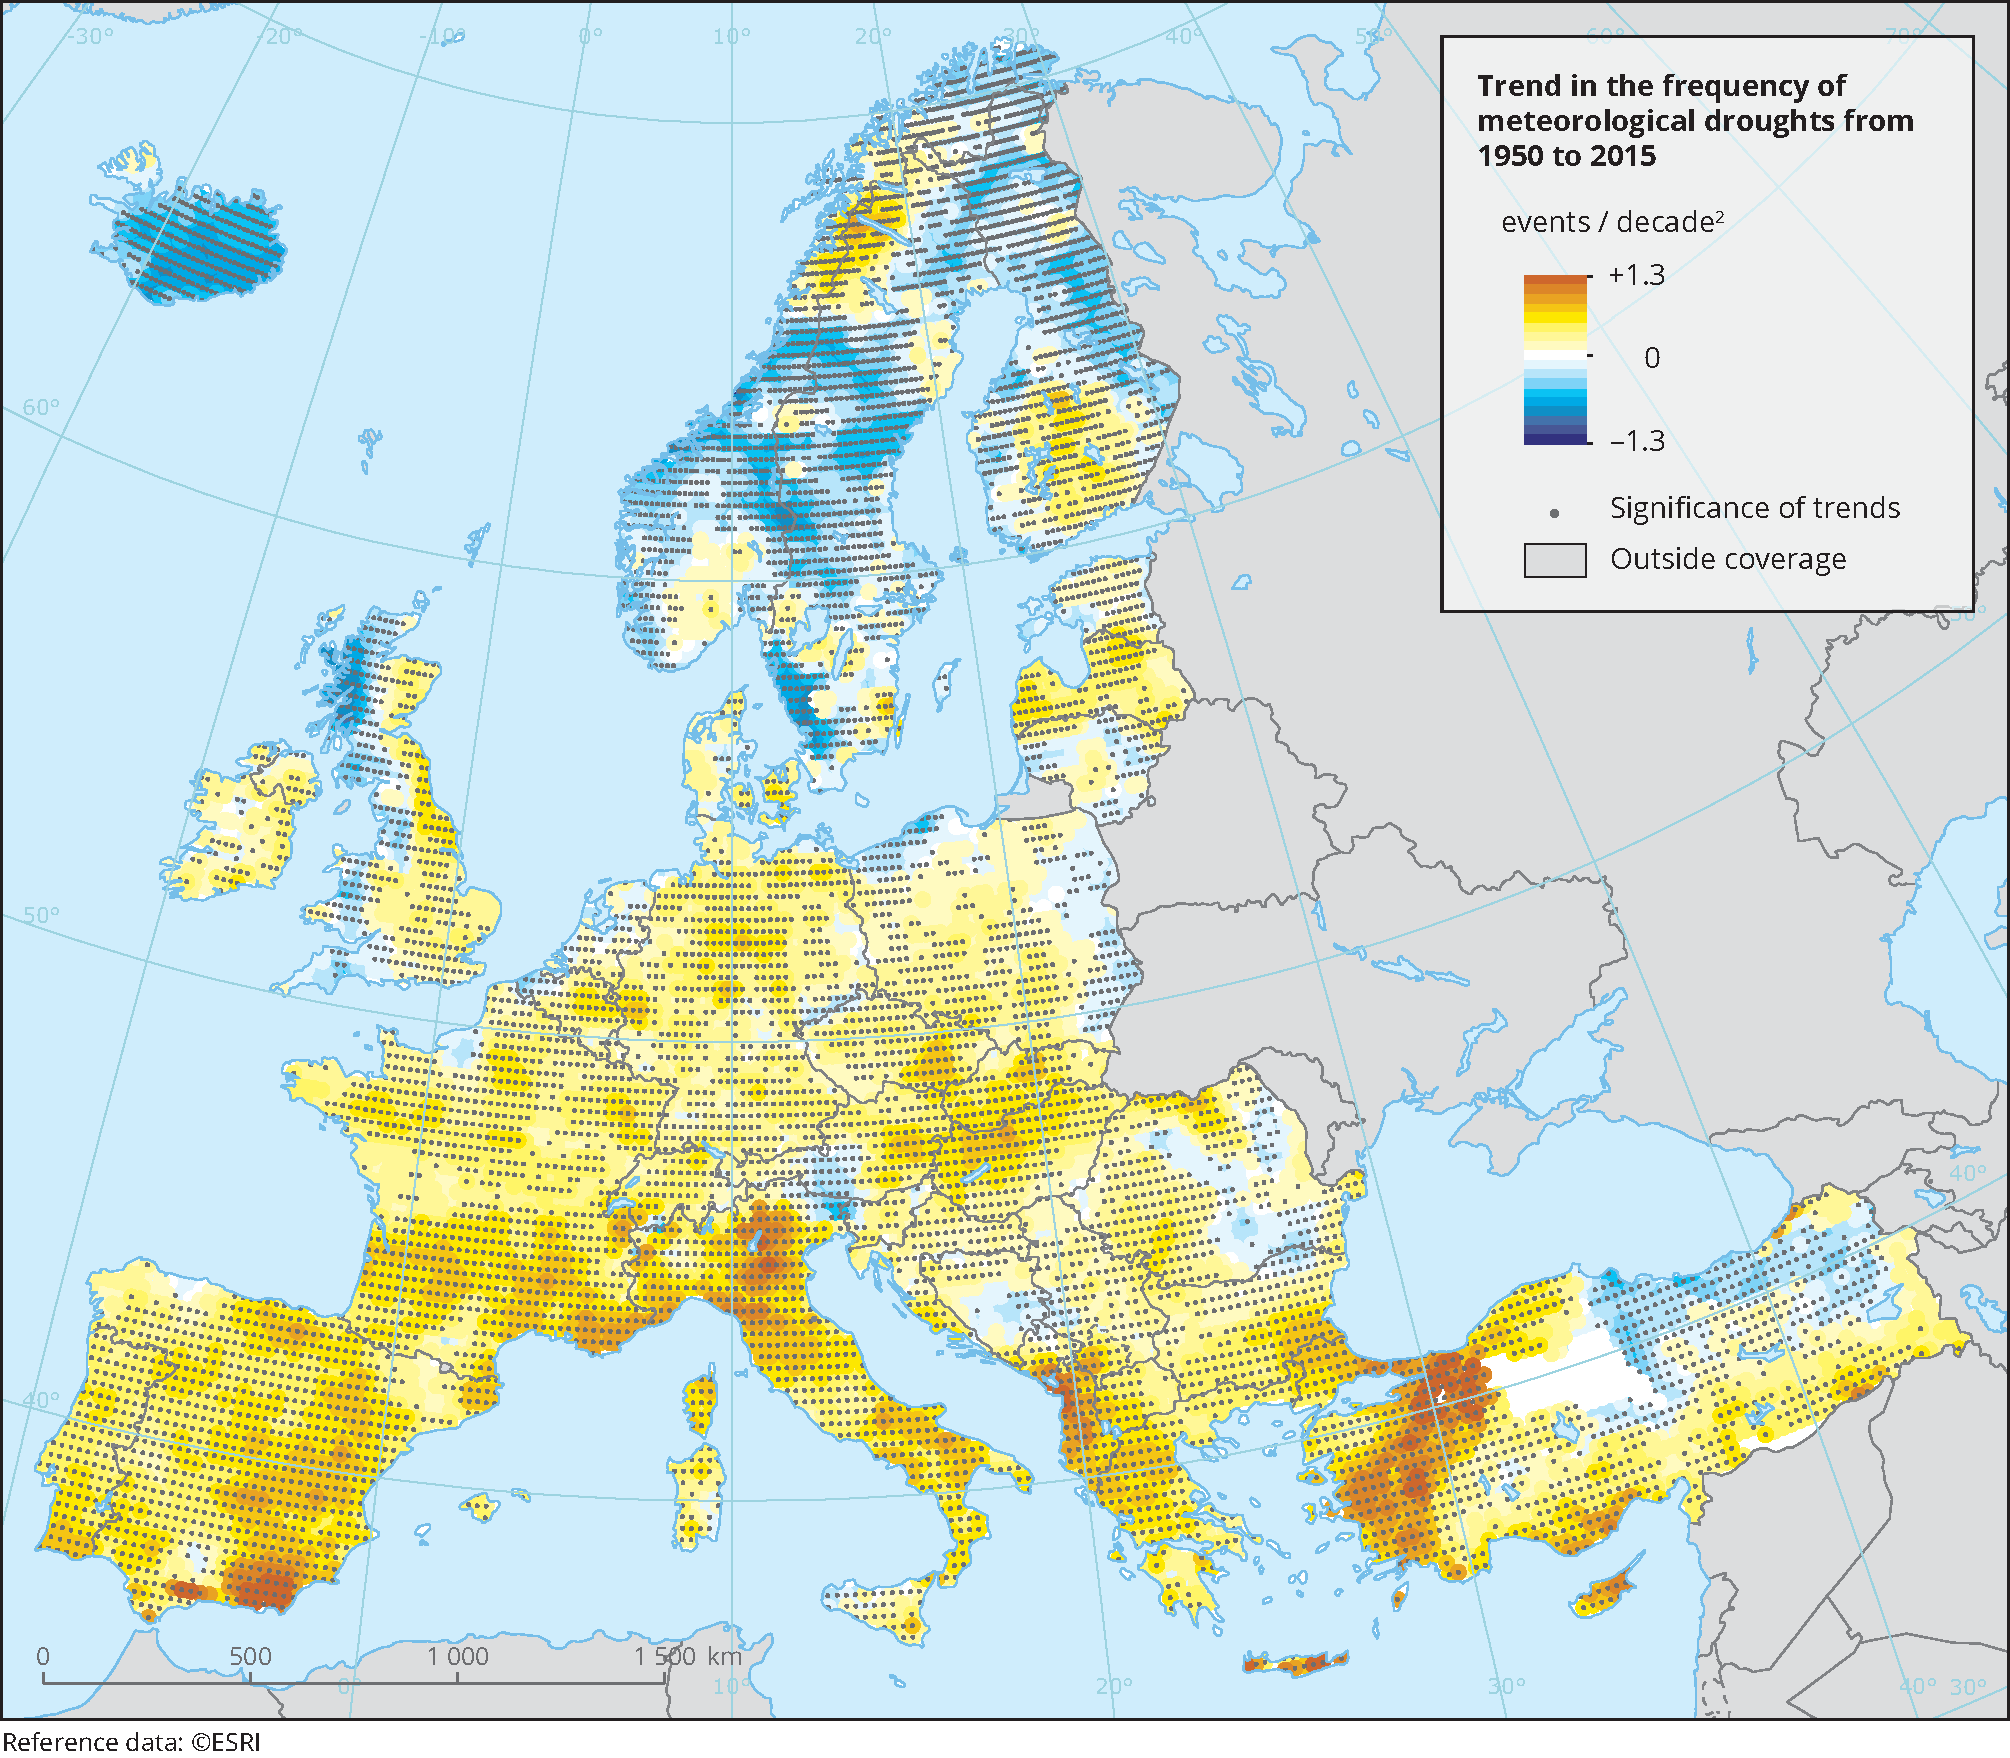 global-warming-and-drought-impacts-in-the-eu